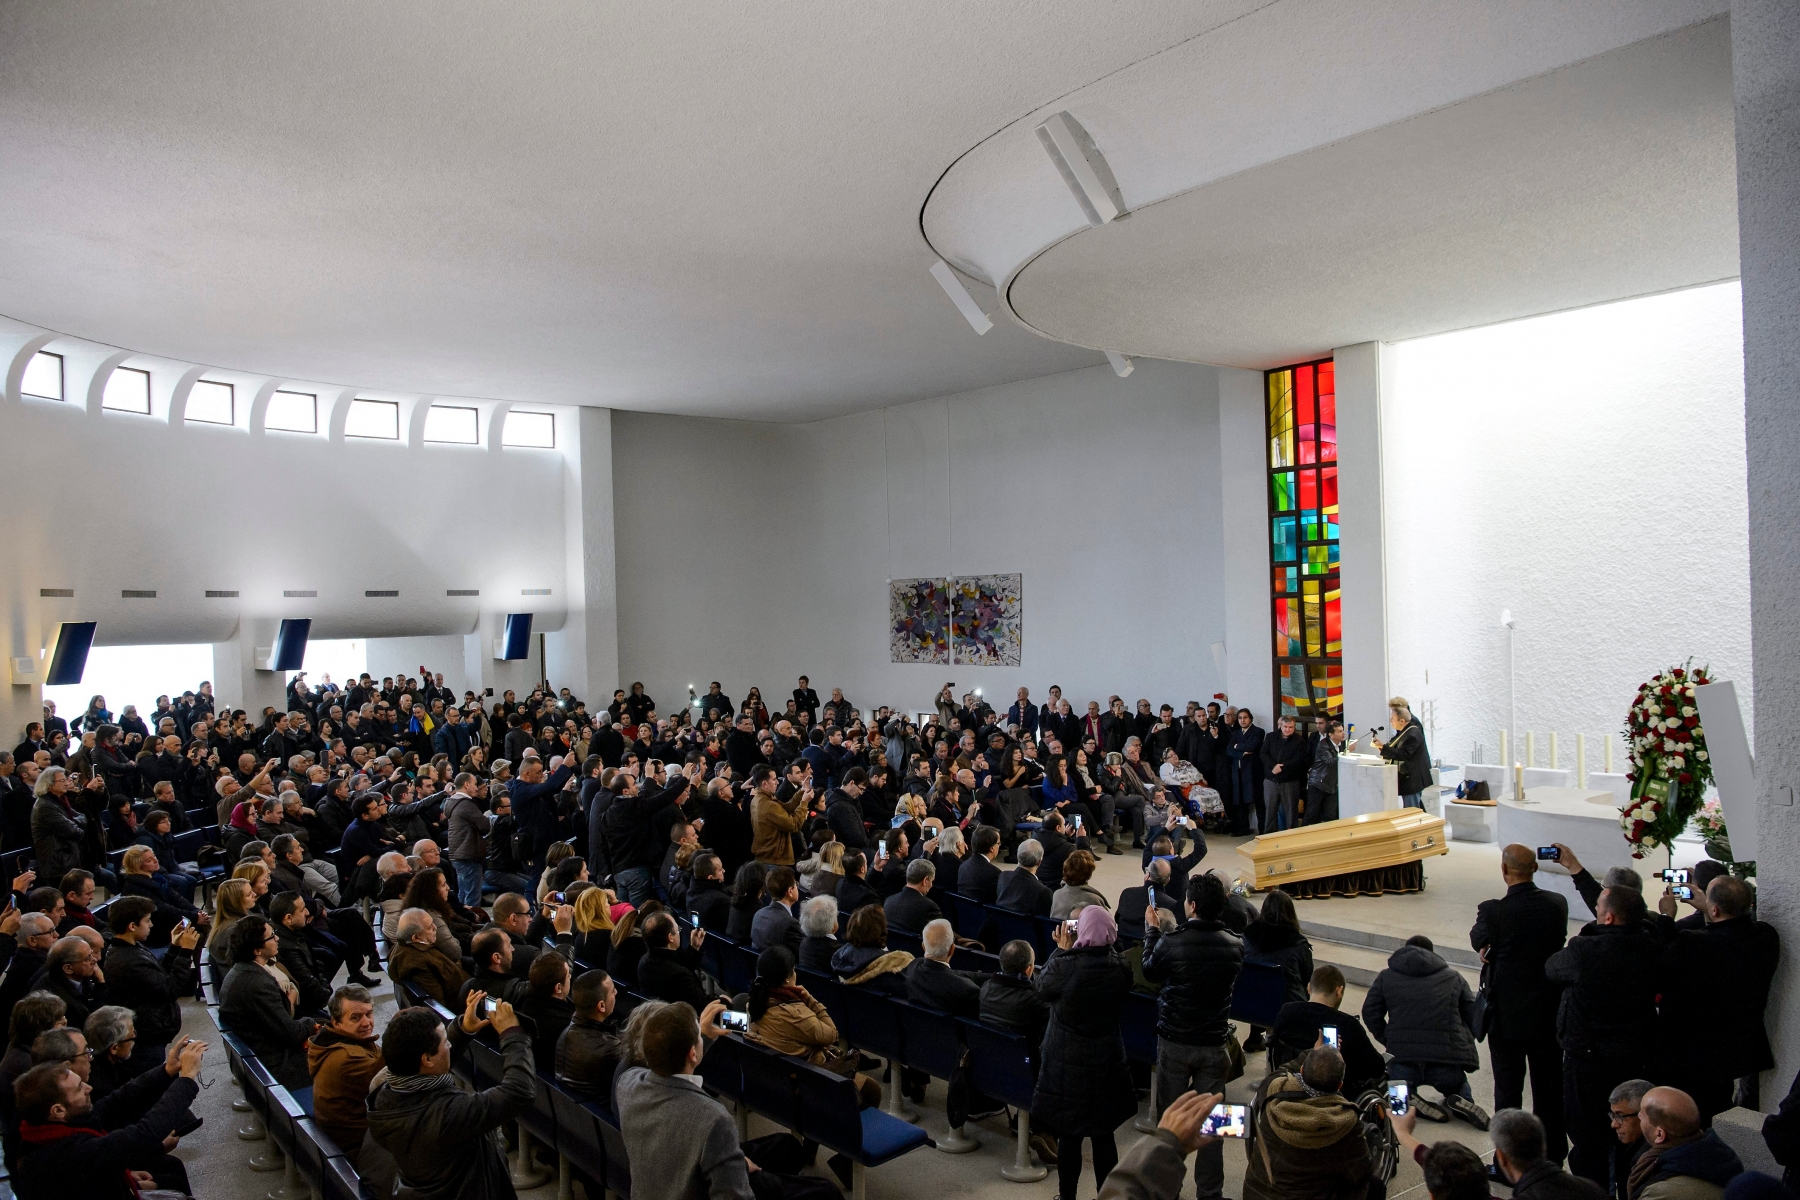 People pay tribute around the coffin of Algerian politician Hocine Ait-Ahmed during a ceremony at the funeral home "Centre funeraire de Montoie" in Lausanne, Switzerland, Monday, December 29, 2015. Hocine Ait-Ahmed, one of he heroes of Algeria's war of independence against France has died in Lausanne, Switzerland at age of 89. (KEYSTONE/Jean-Christophe Bott) SWITZERLAND ALGERIA HOCINE AIT-AHMED